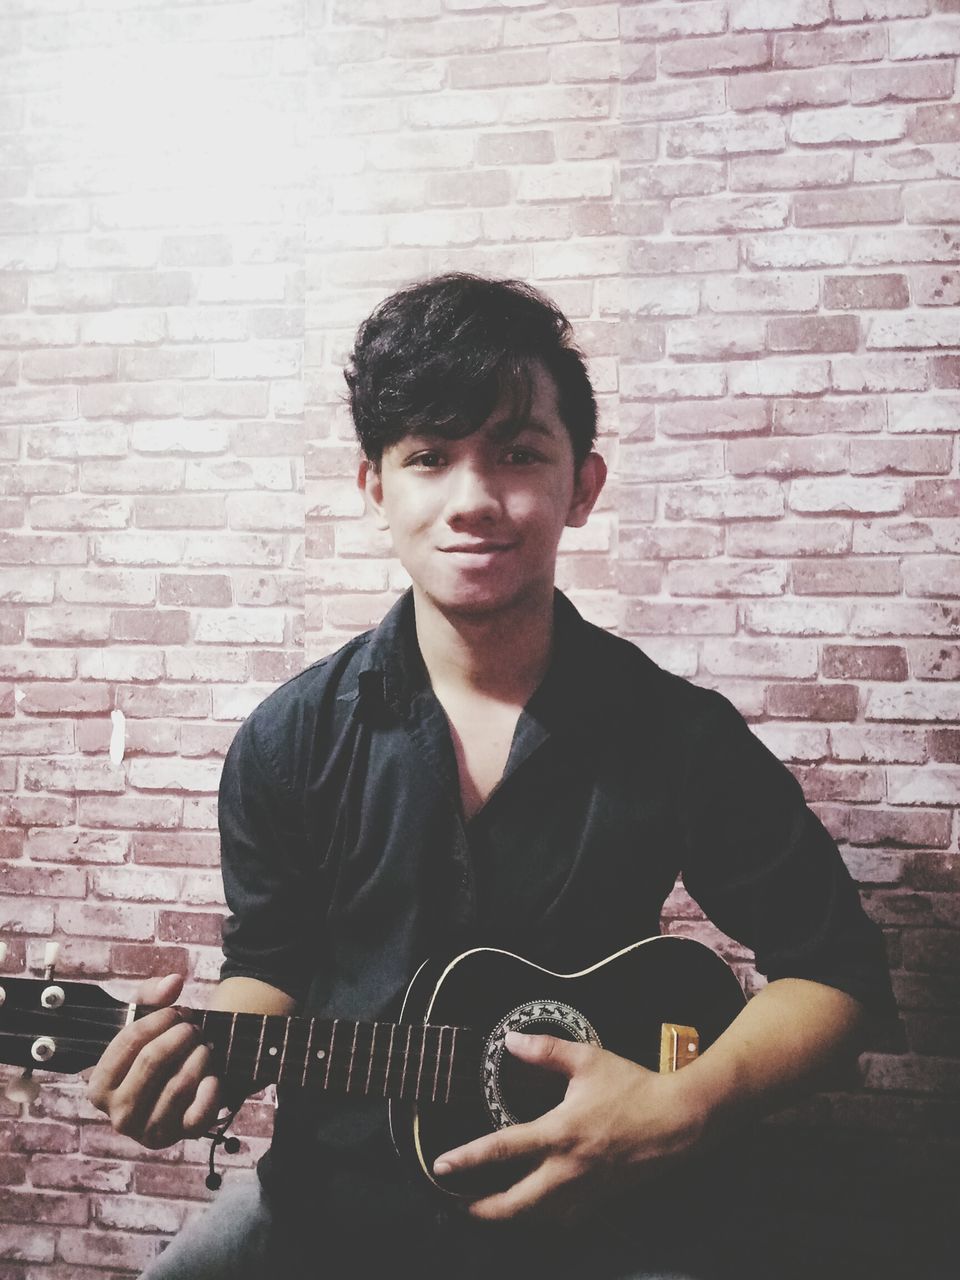 one person, brick, brick wall, wall, young adult, young men, wall - building feature, real people, looking at camera, portrait, front view, music, lifestyles, casual clothing, musical instrument, guitar, arts culture and entertainment, string instrument, leisure activity, musical equipment, musician, plucking an instrument